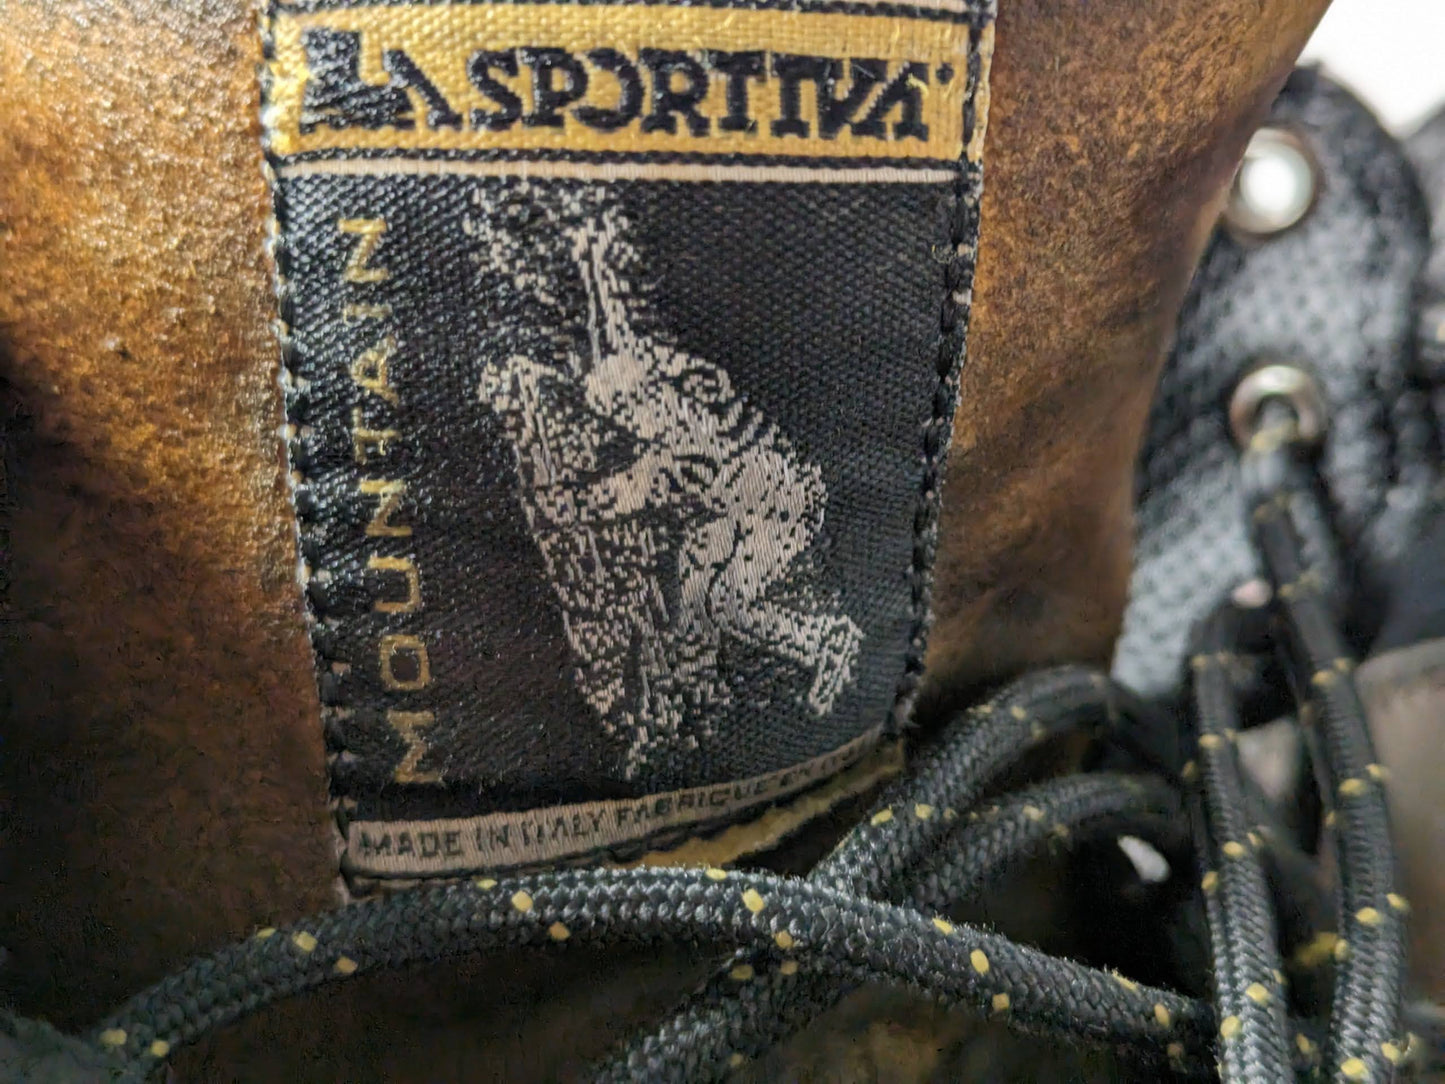 LA Sportiva Mountaineering Boots Size 10 Color Brown Condition Used